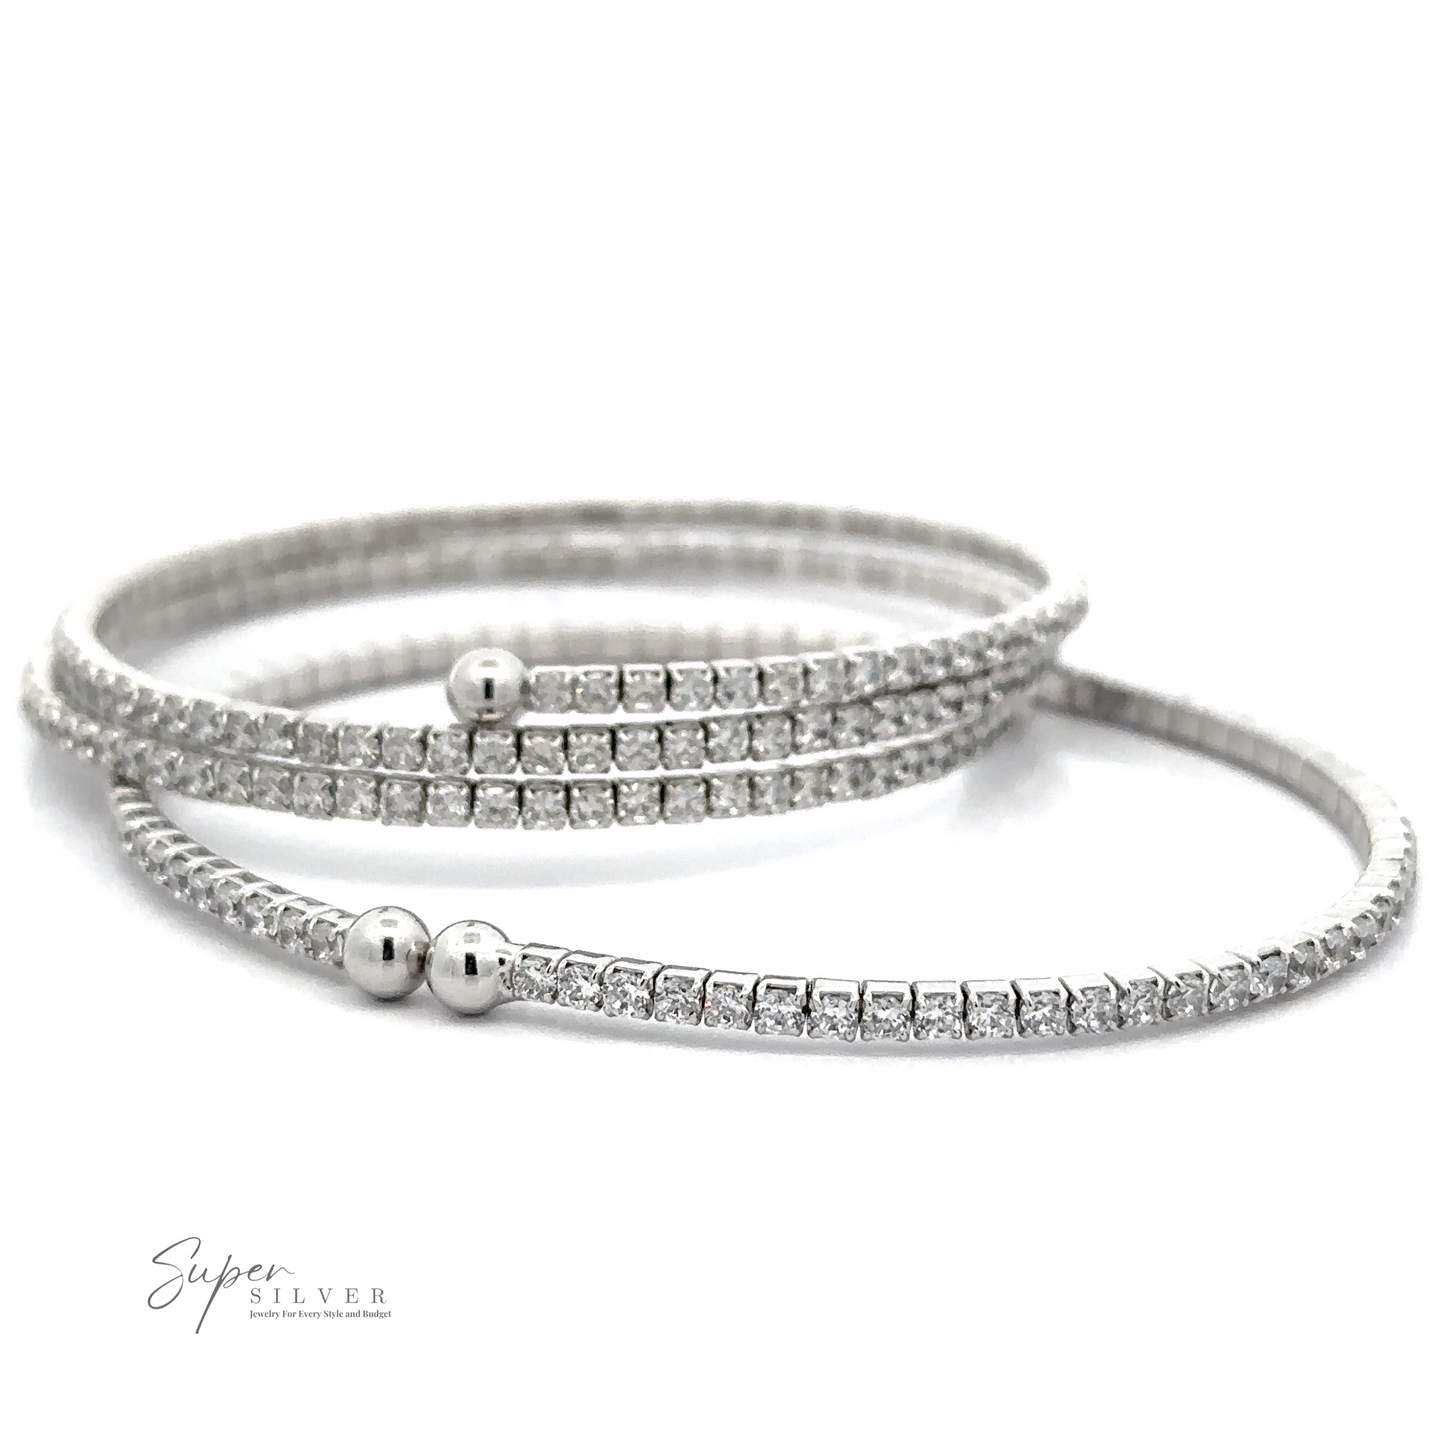 Two Cubic Zirconia Simple Wrap Bracelets encrusted with small Cubic Zirconia, each featuring a spherical clasp, are displayed against a white background. The image includes a small "Super Silver" logo in the bottom left corner.